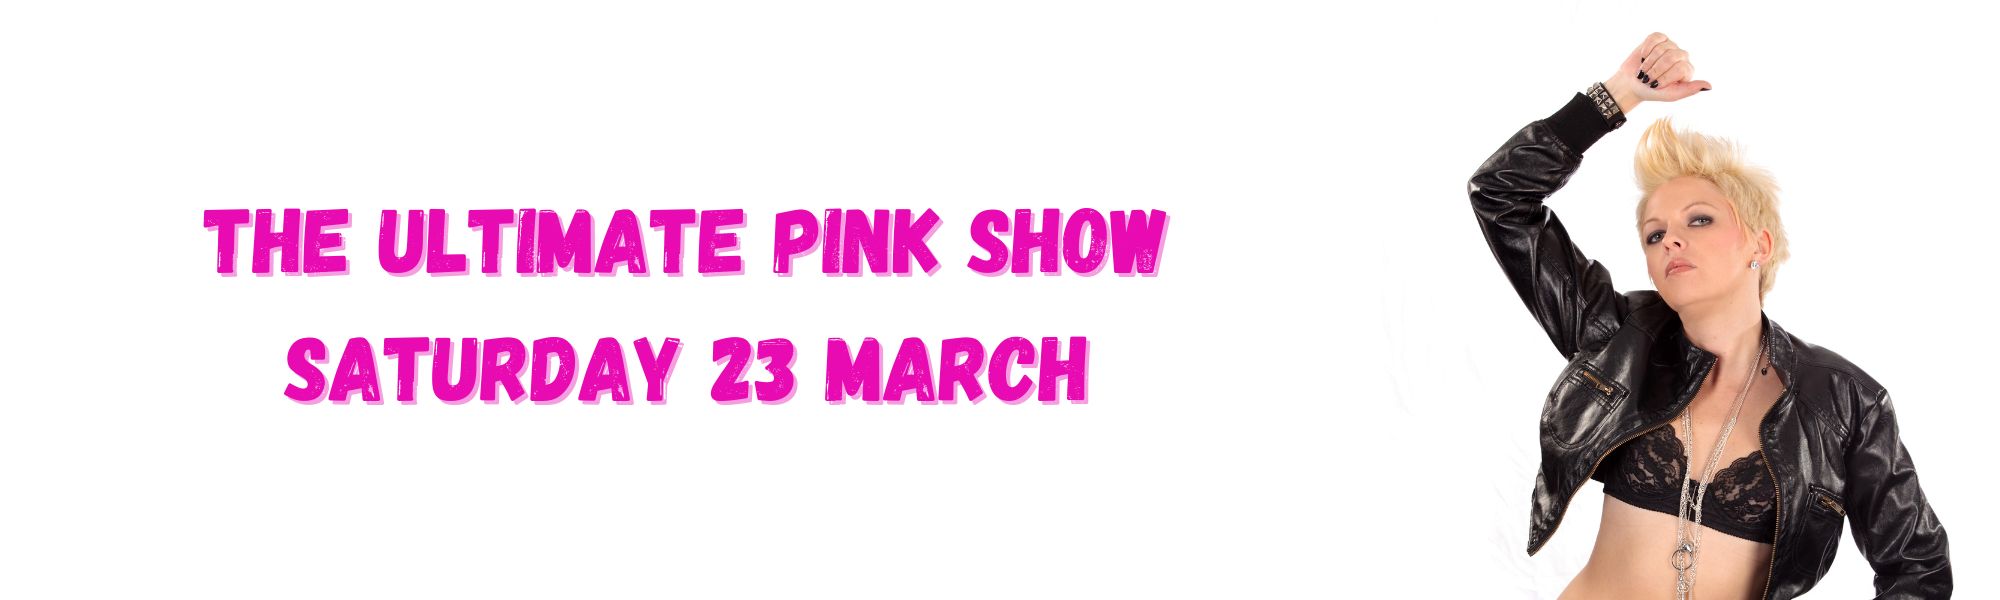 The Ultimate Pink Show - Riverstone Schofields Memorial Club